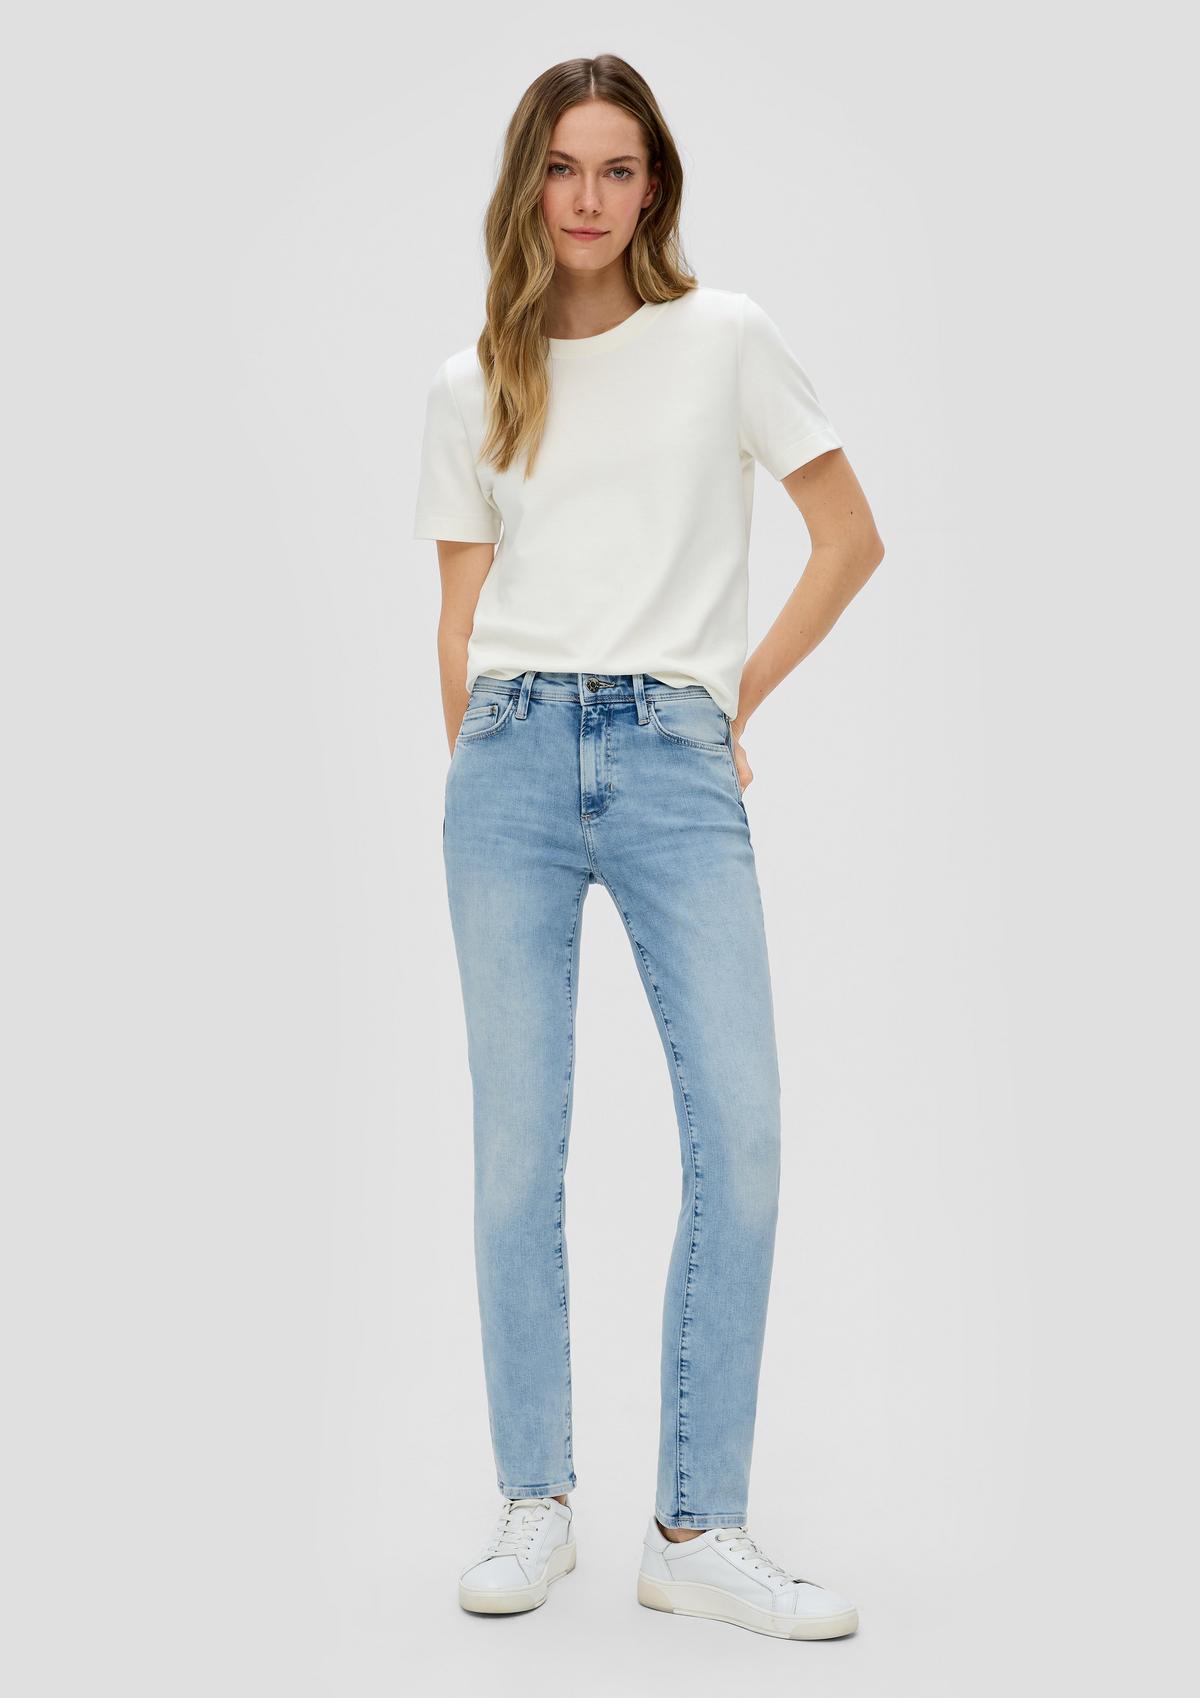 s.Oliver Betsy jeans / slim fit / mid rise / slim leg / stretch cotton